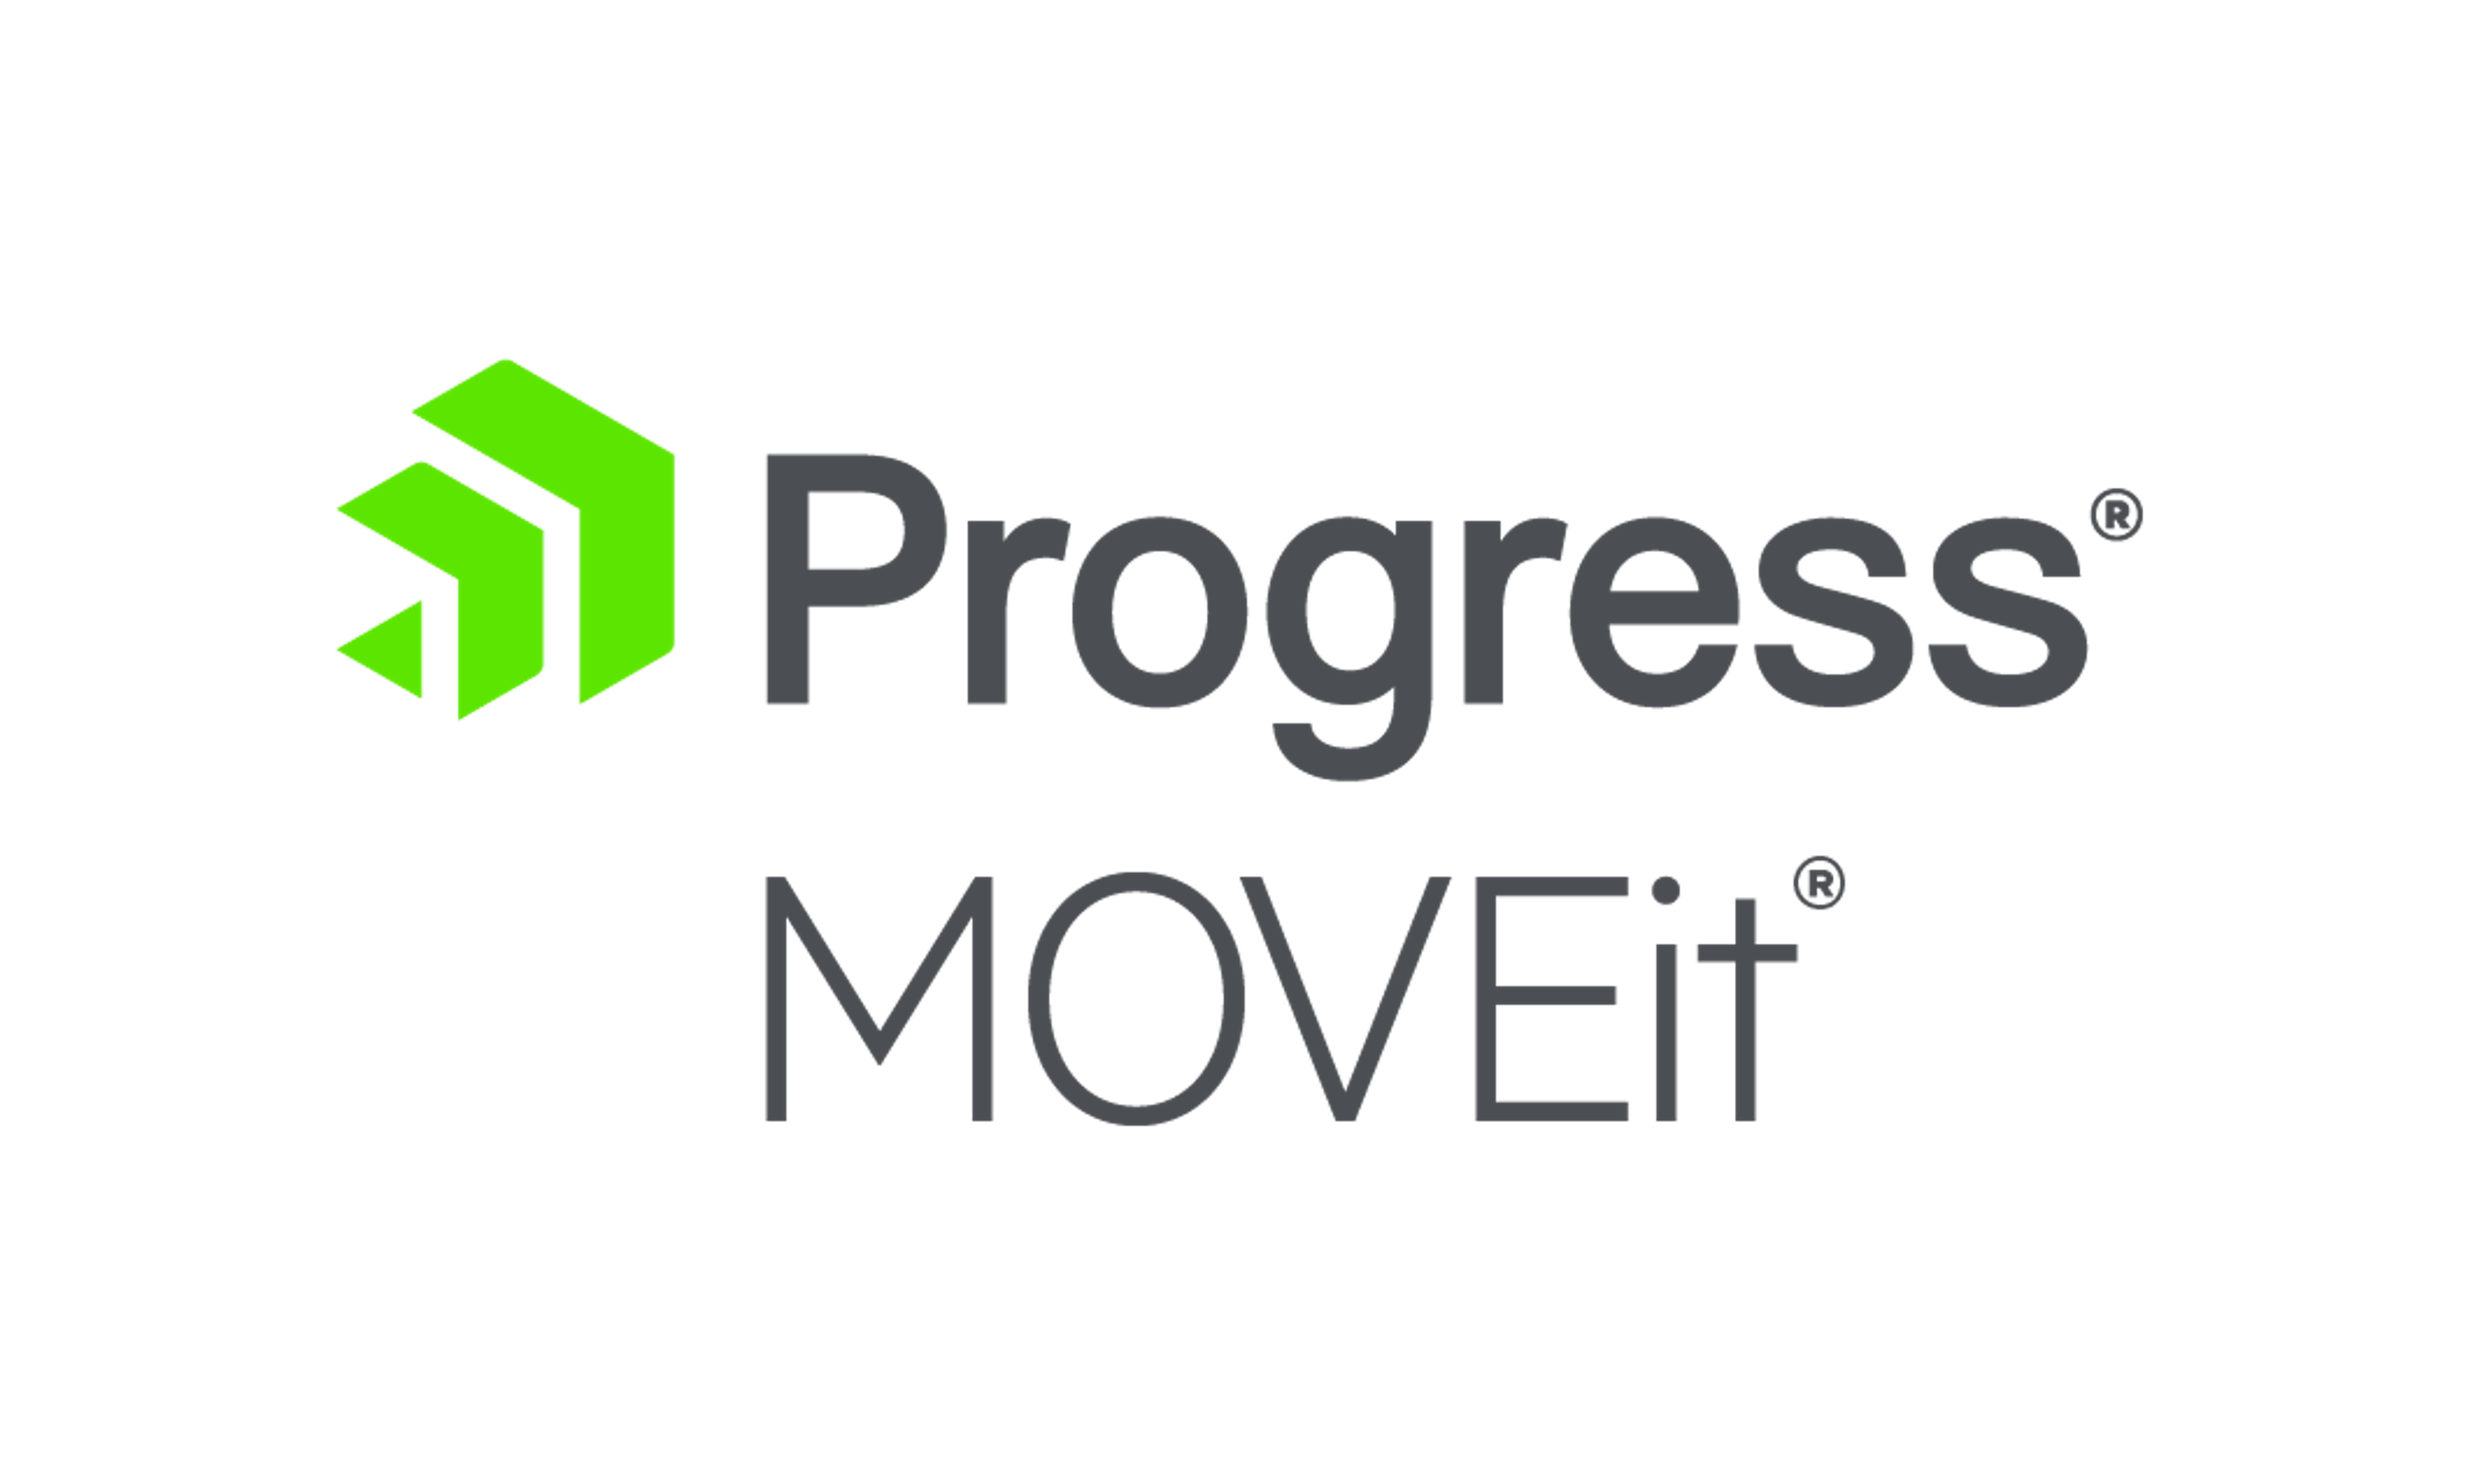 MOVEit Reviews Pros & Cons, Ratings & more GetApp